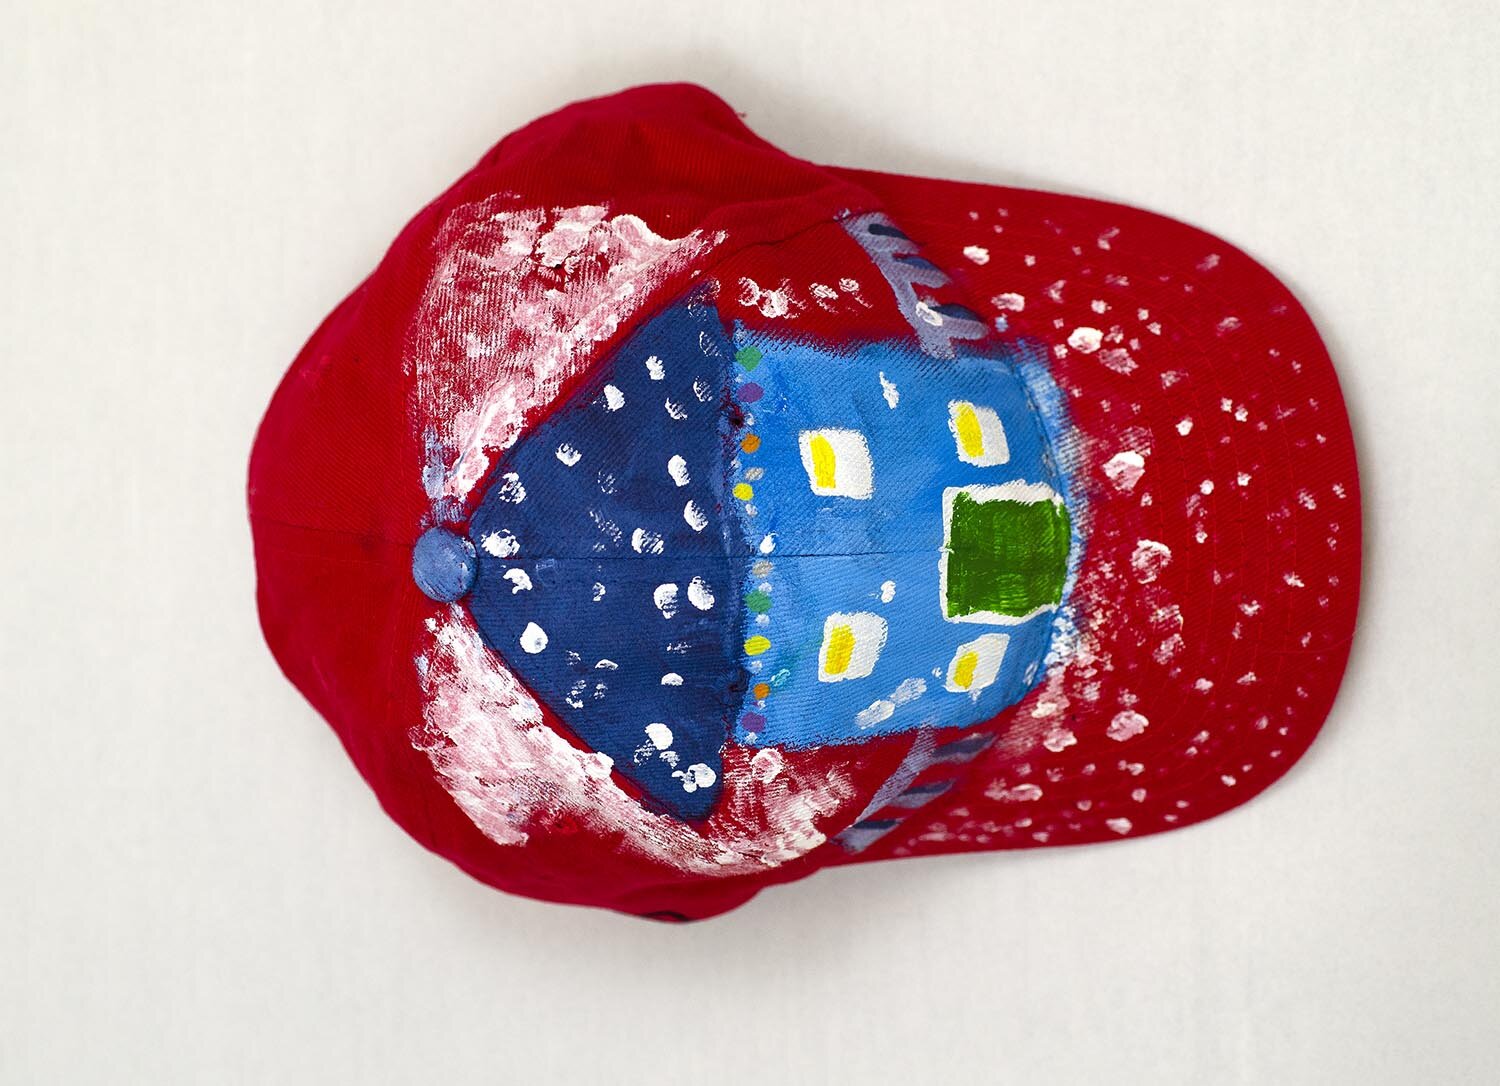 Red Baseball Cap with hand painted Winter House by Mike Hinchcliff